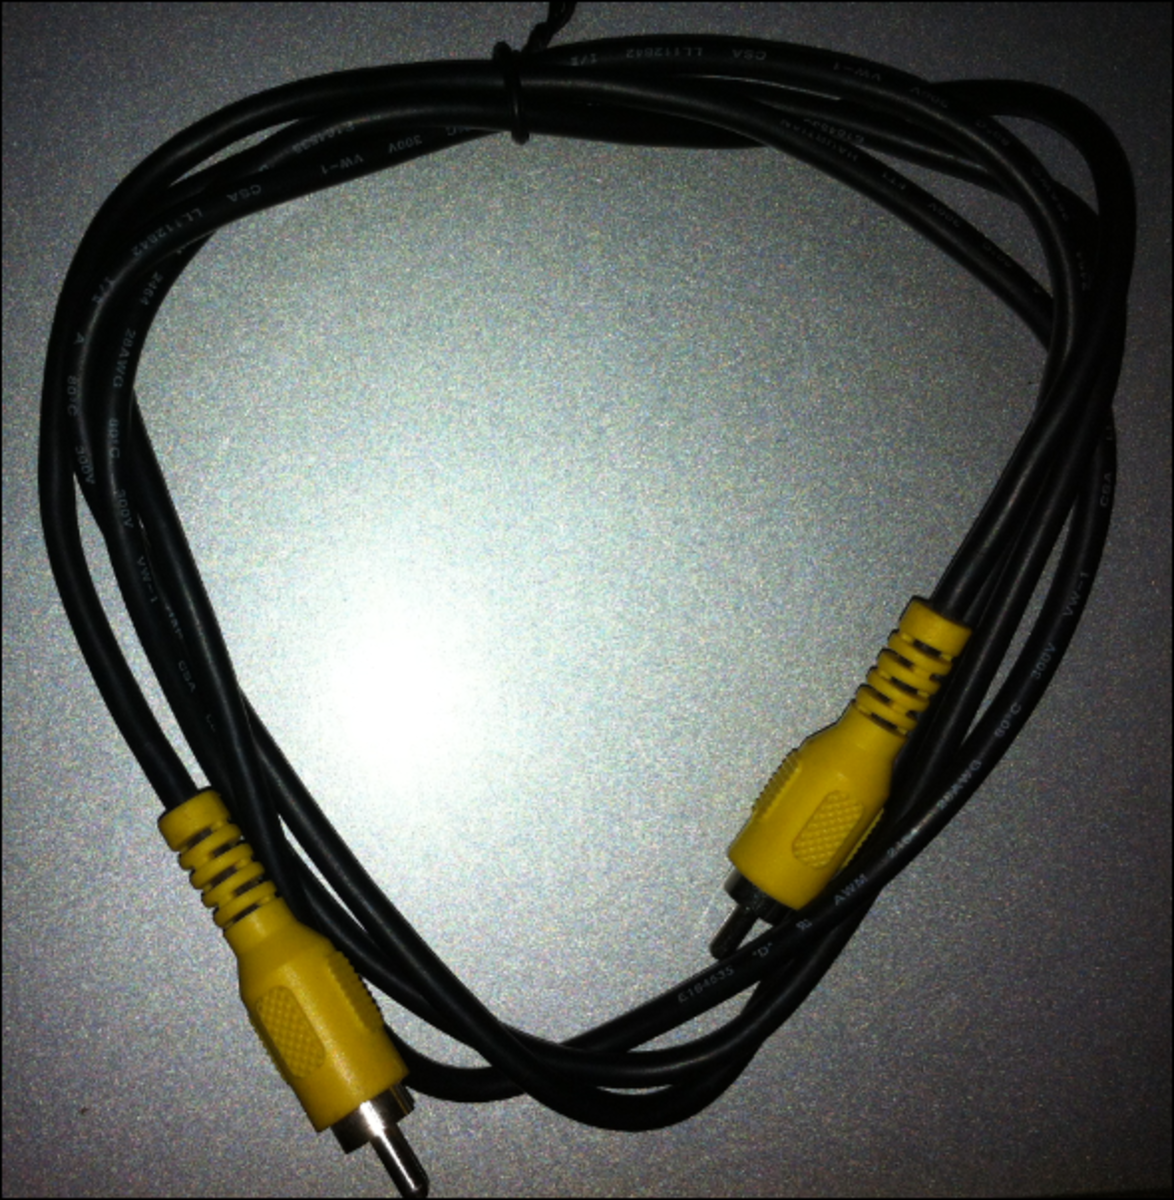 An RCA video cable